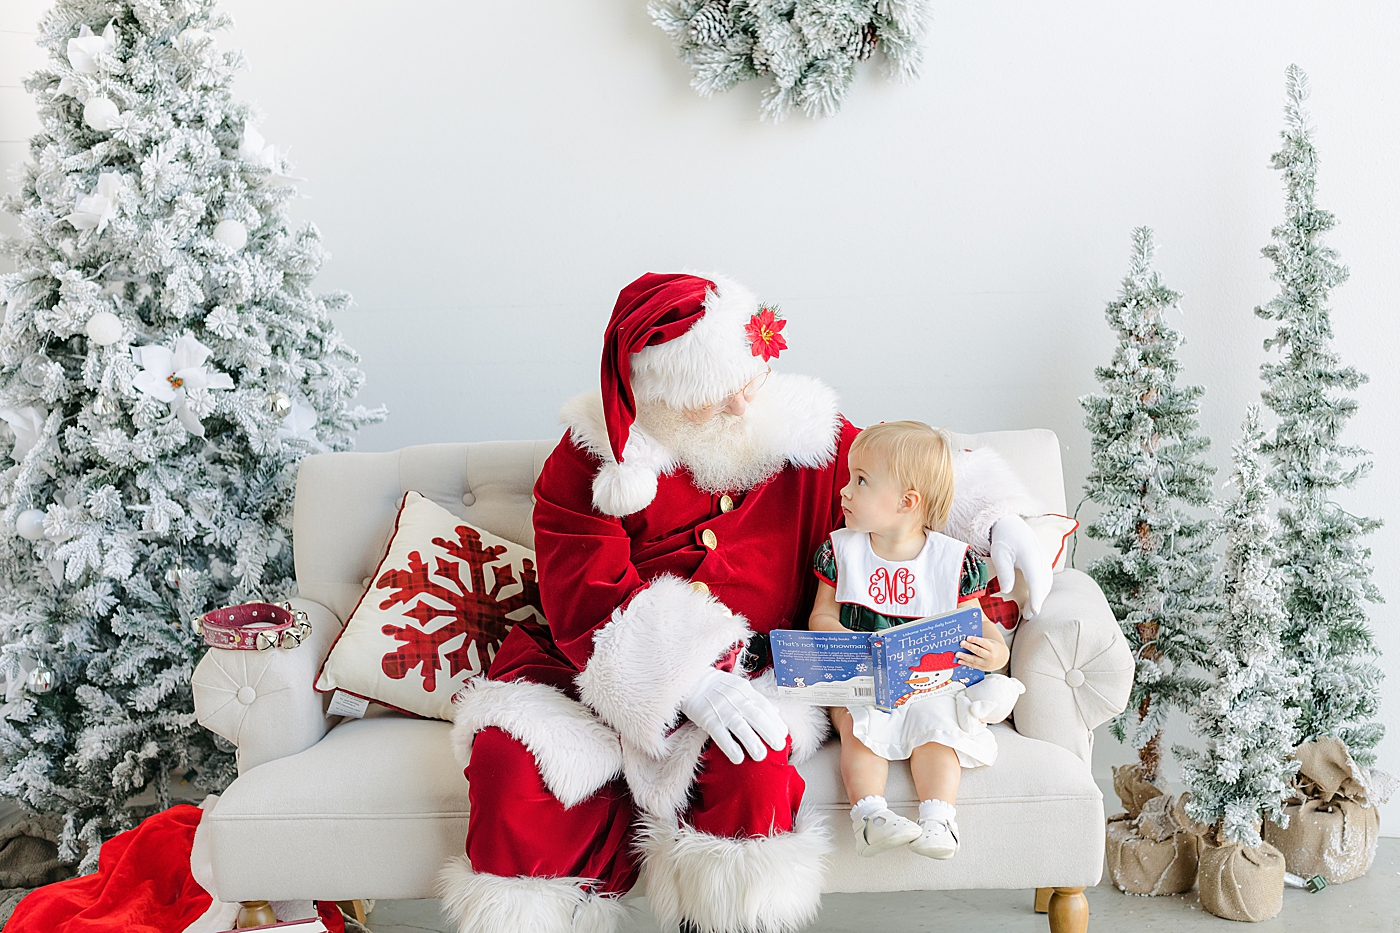 Little girl in a dress sitting with Santa | Images by Sana Ahmed Photography